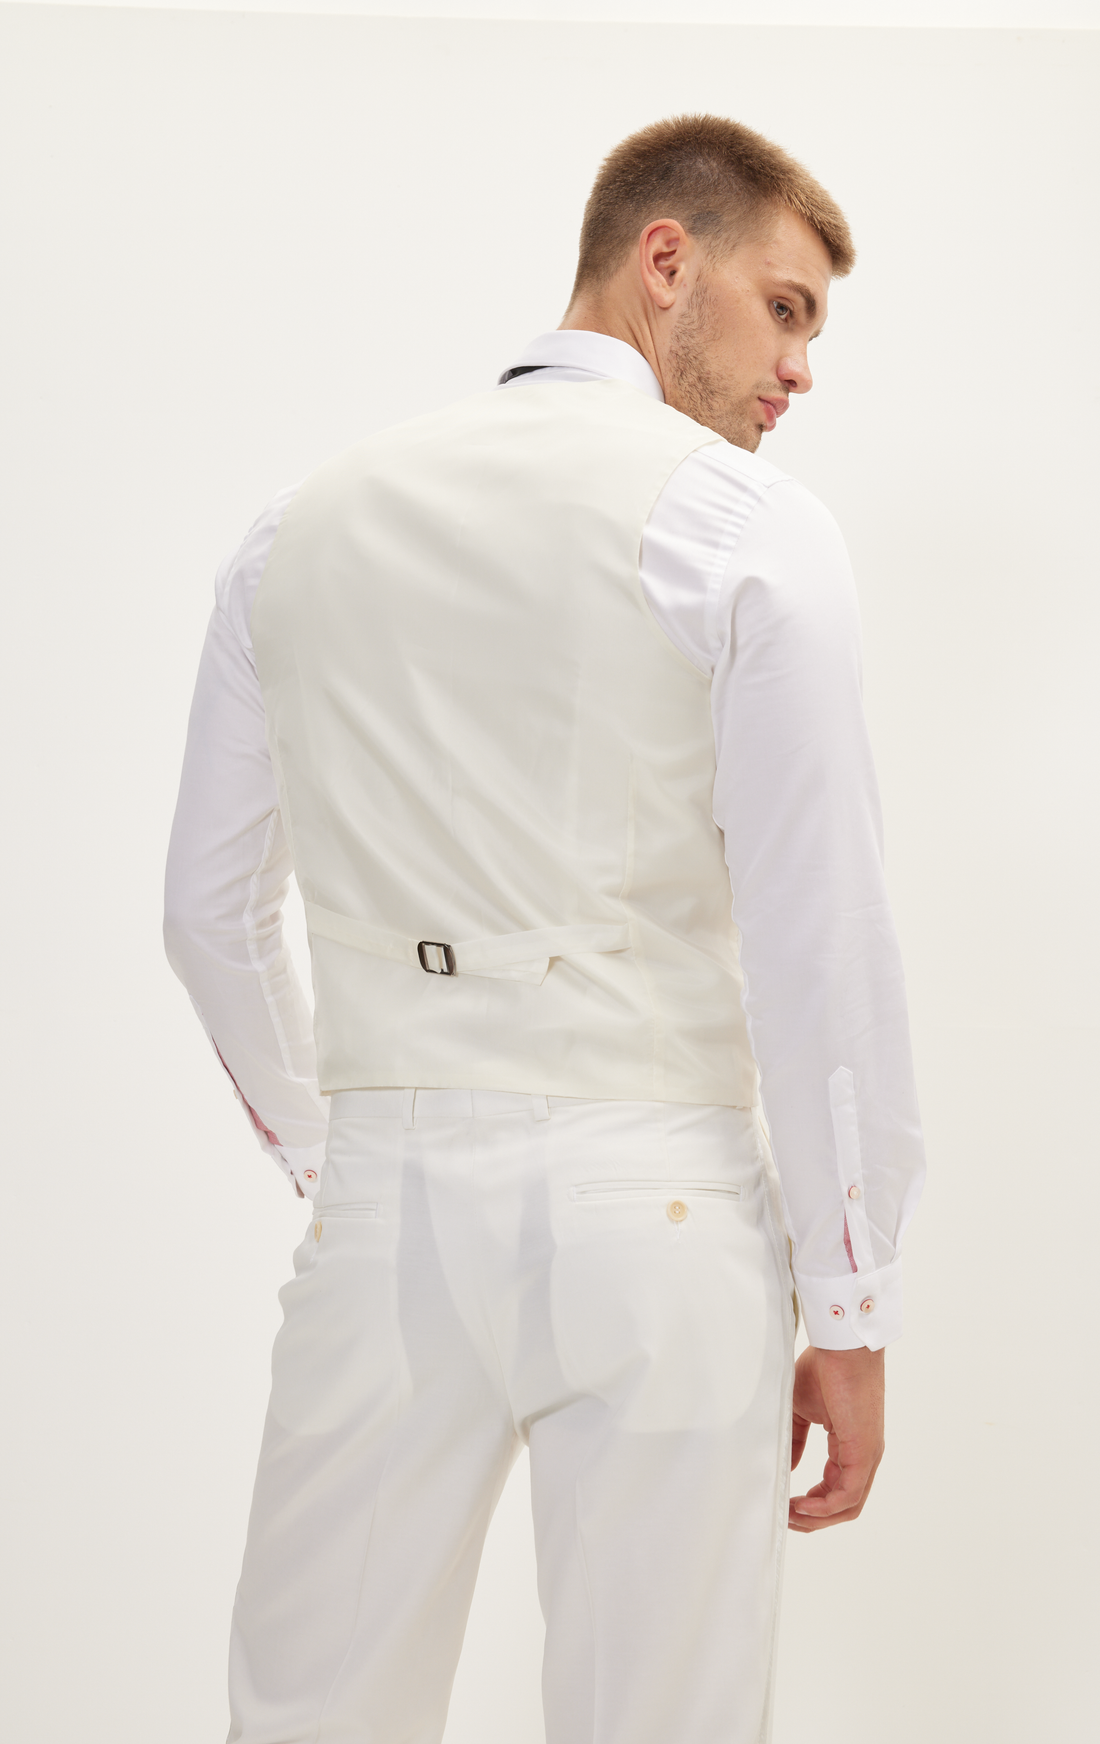 N° R165 DOUBLE BREASTED U-SHAPED VEST - WHITE